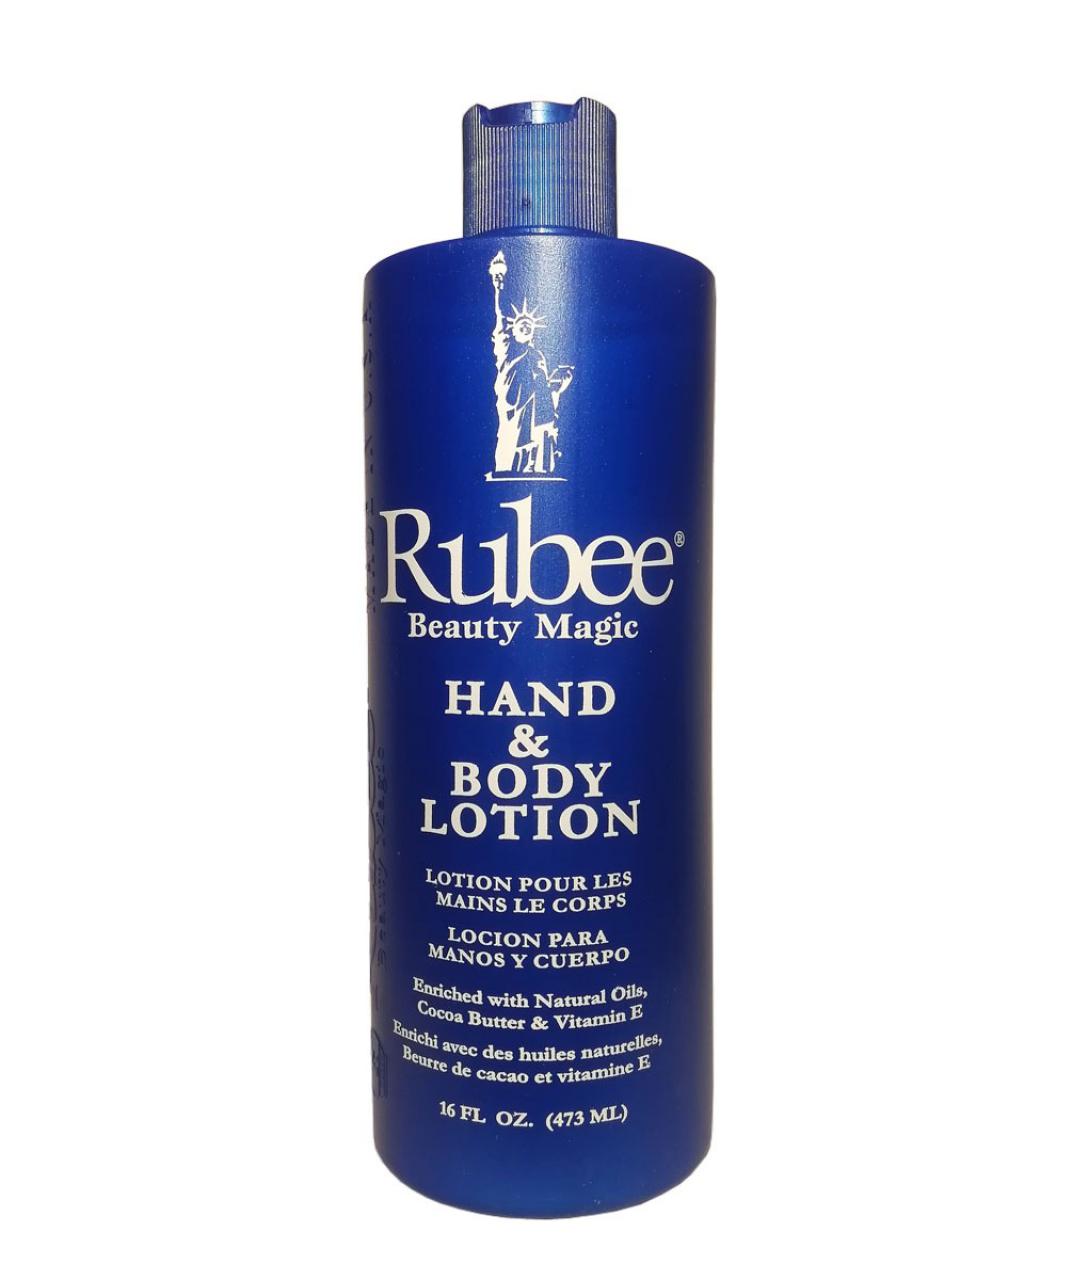 Rubee hand and body lotion